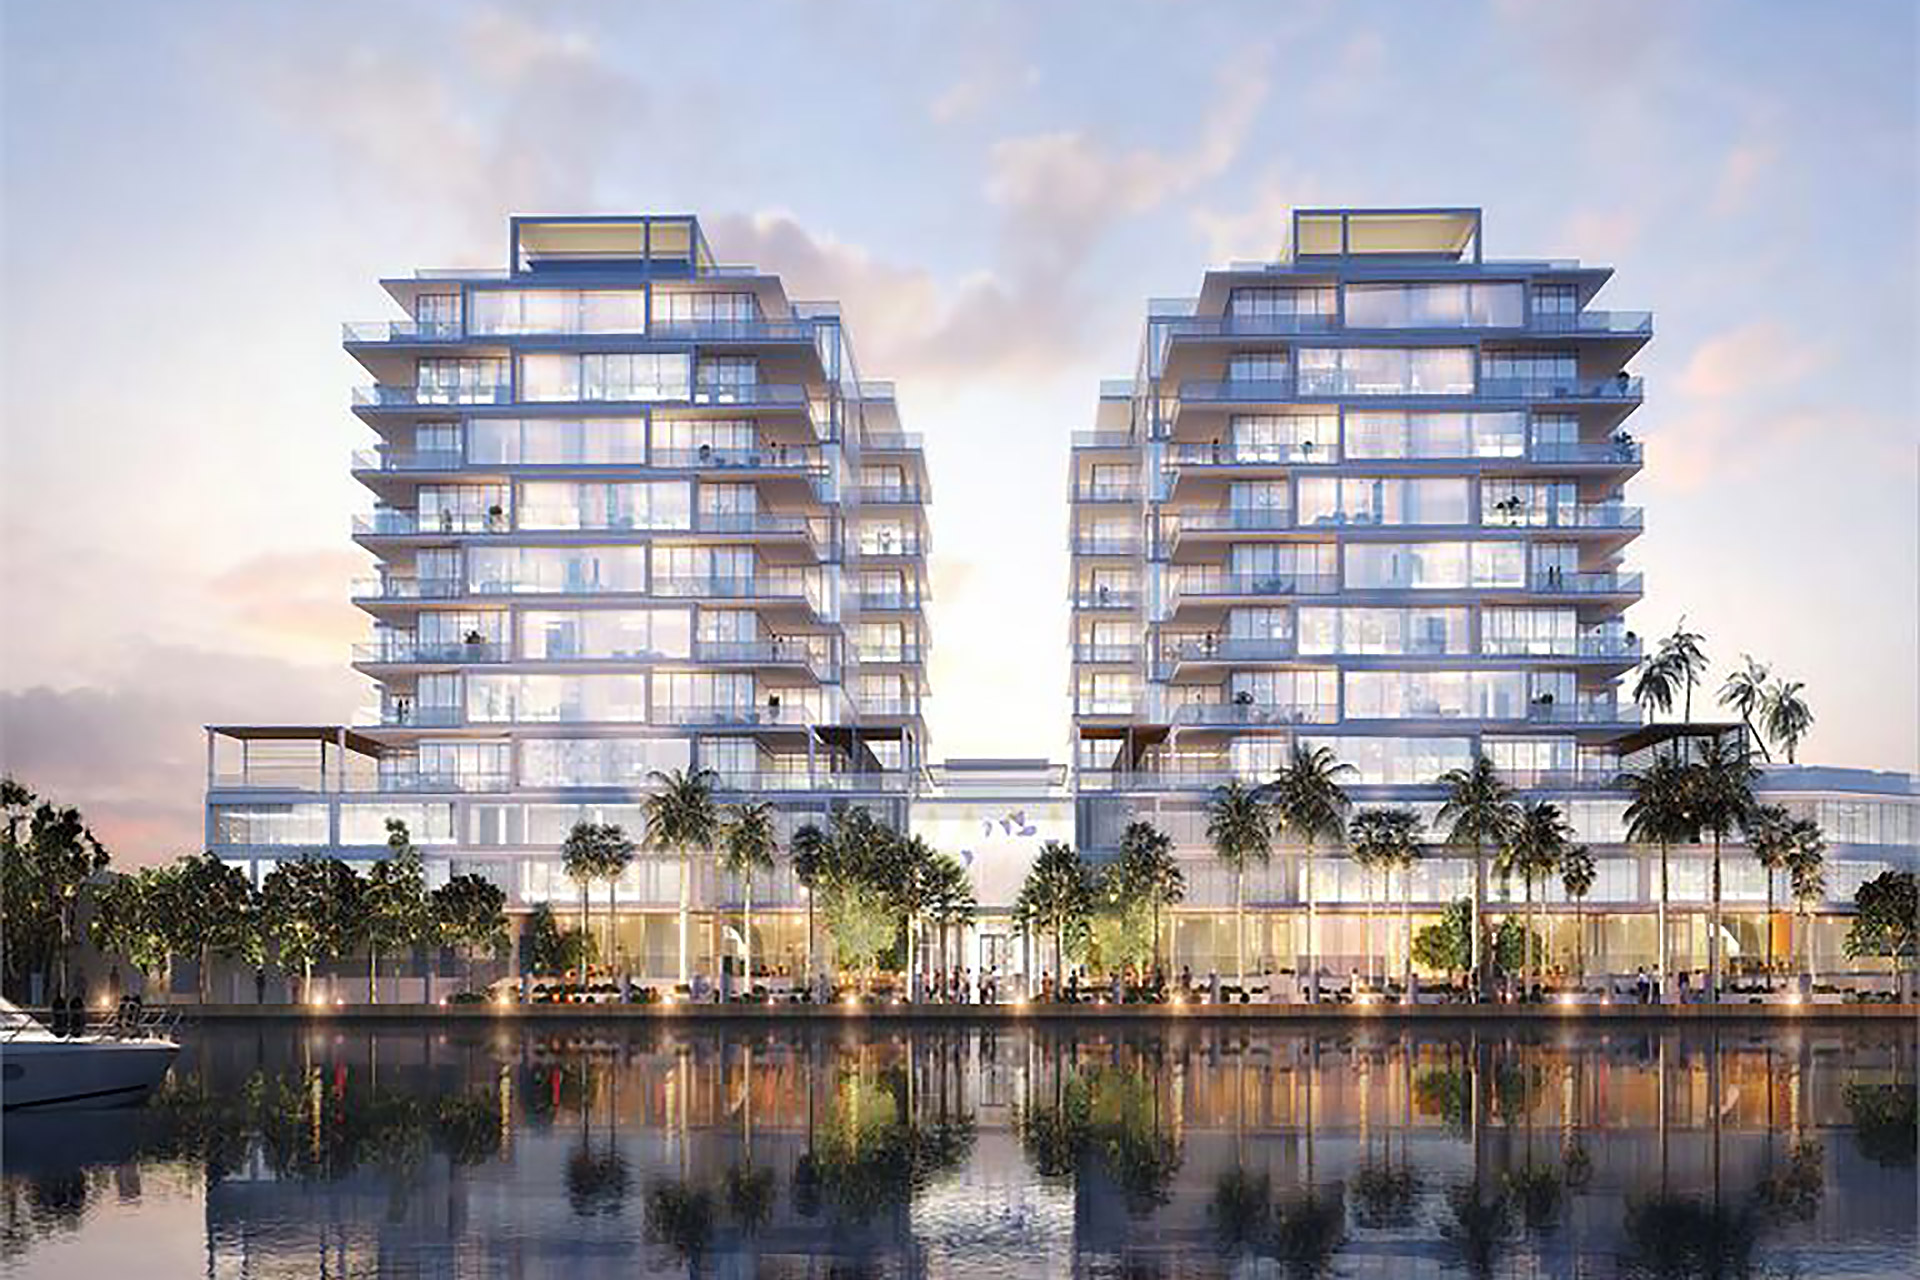 Edition Residences Fort Lauderdale | Uncrate, #Edition #Residences #Fort #Lauderdale #Uncrate